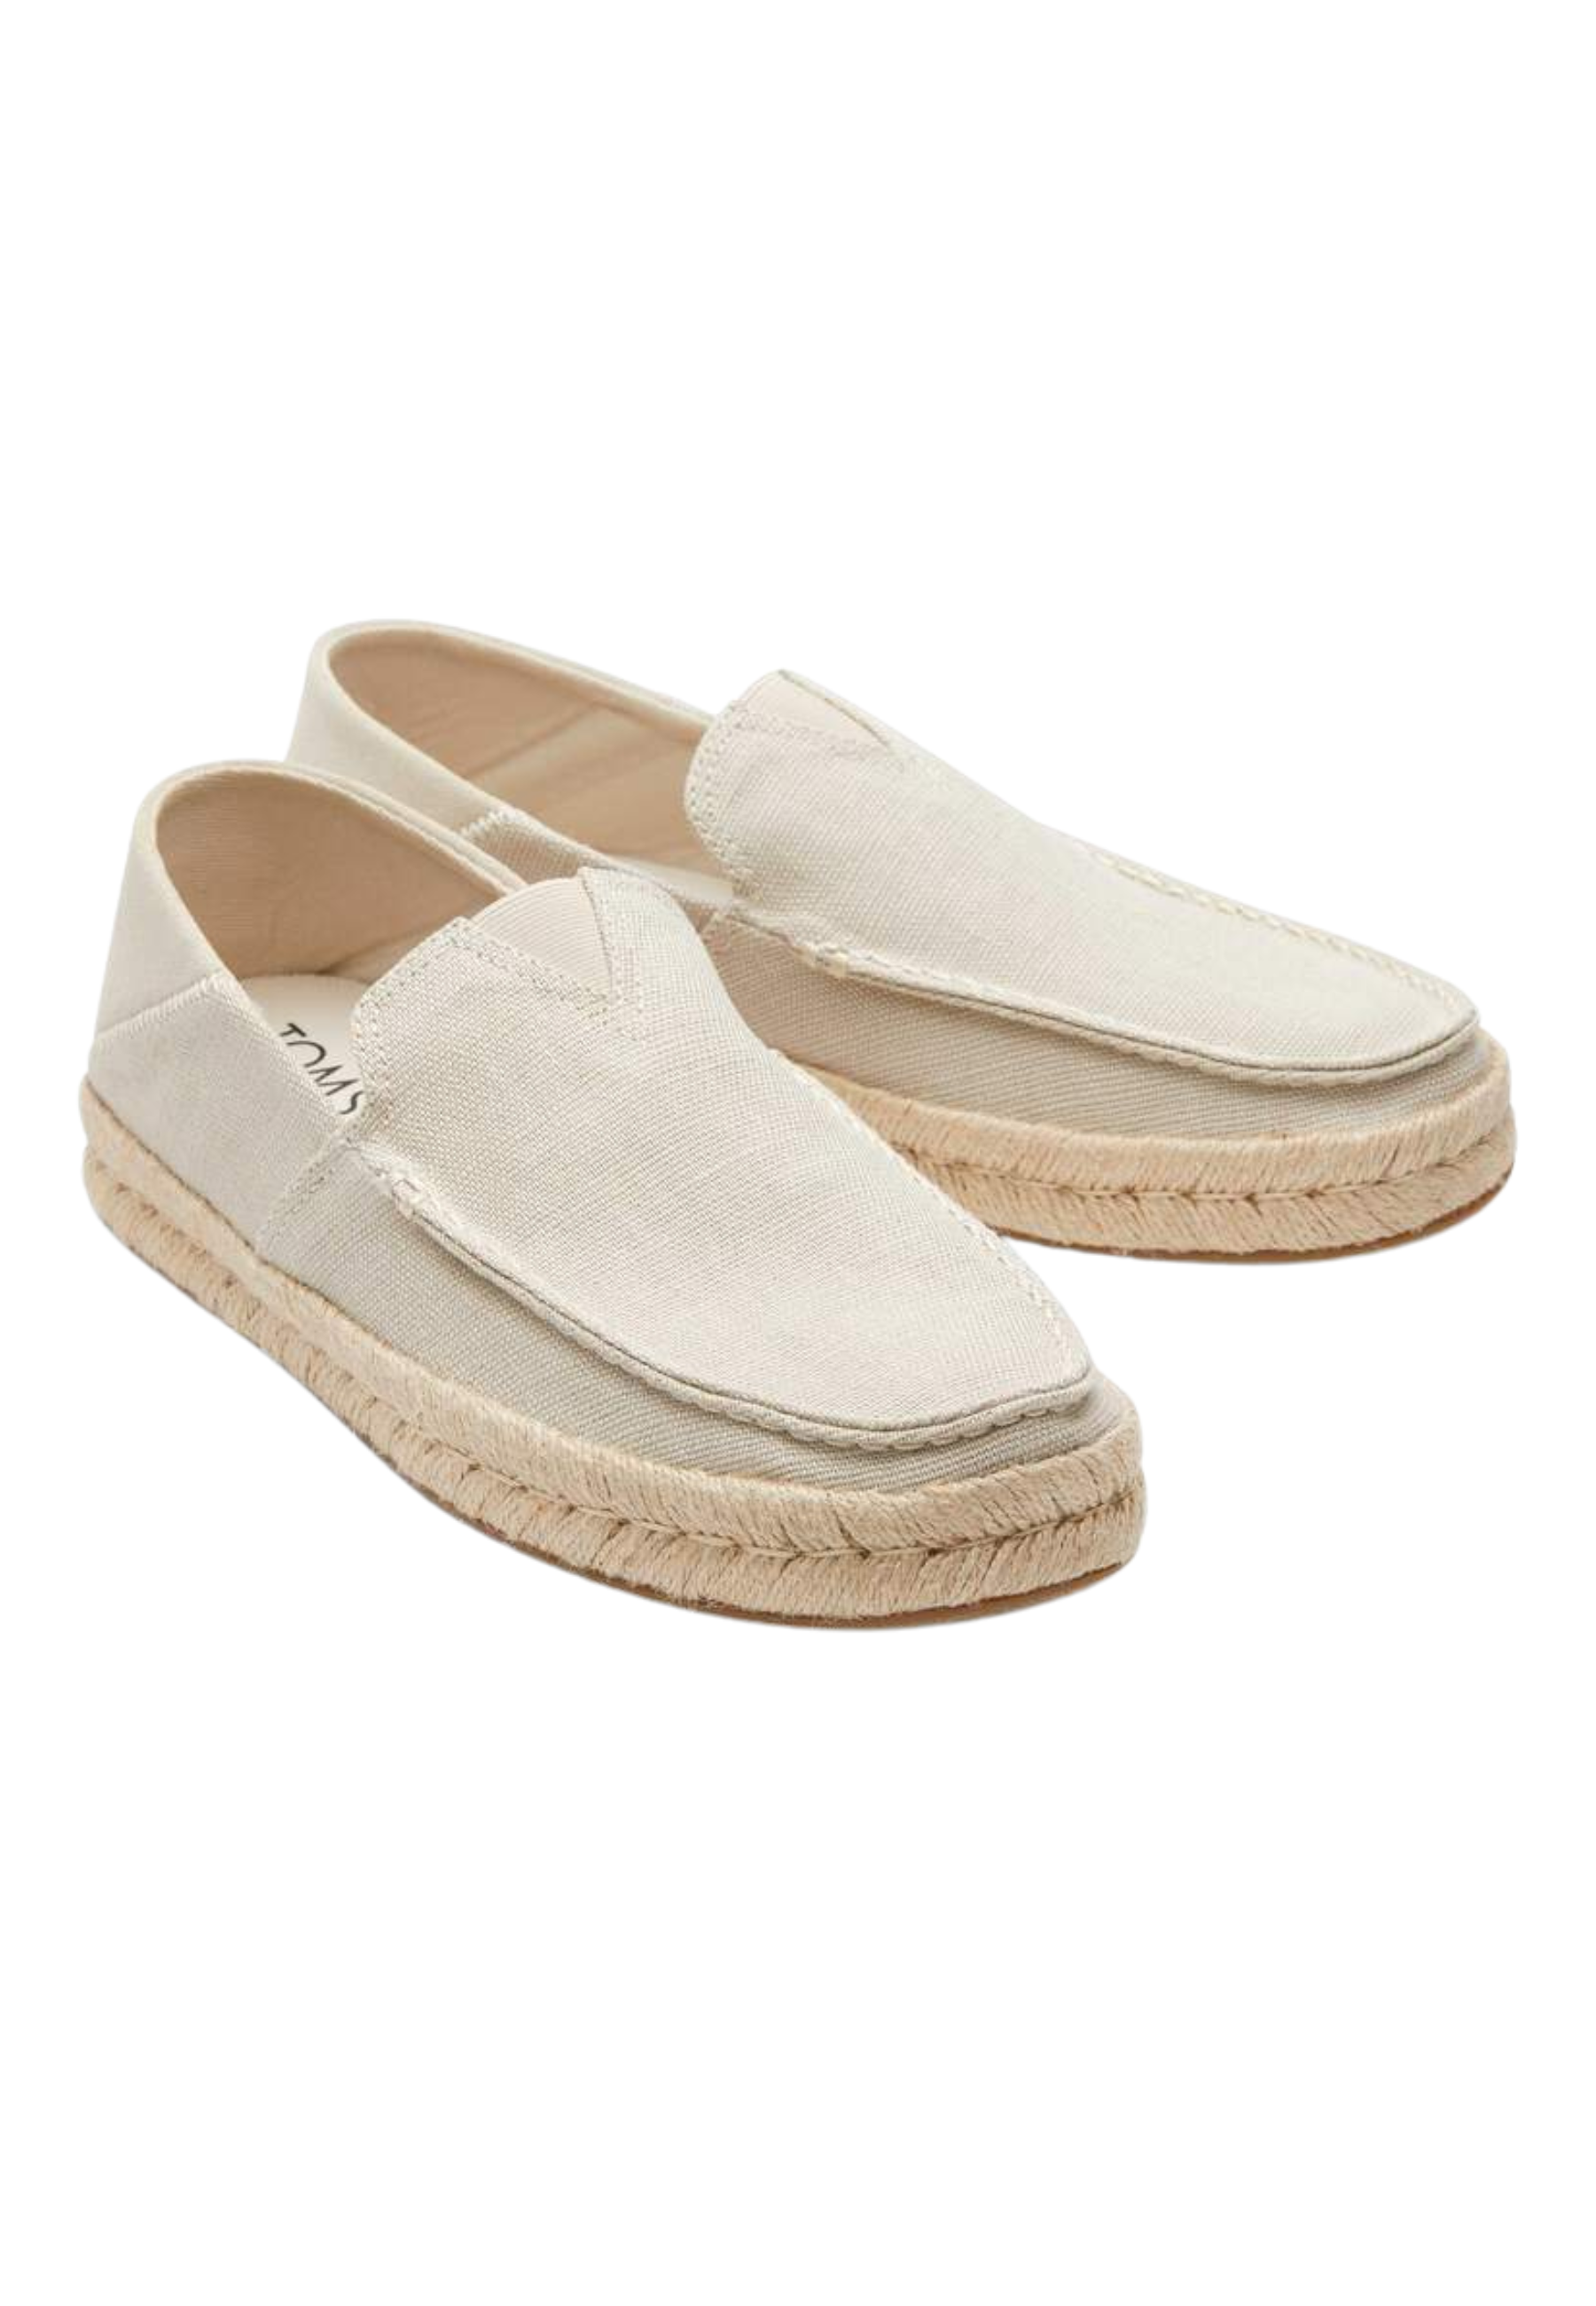 Alonso loafer rope loafers creme